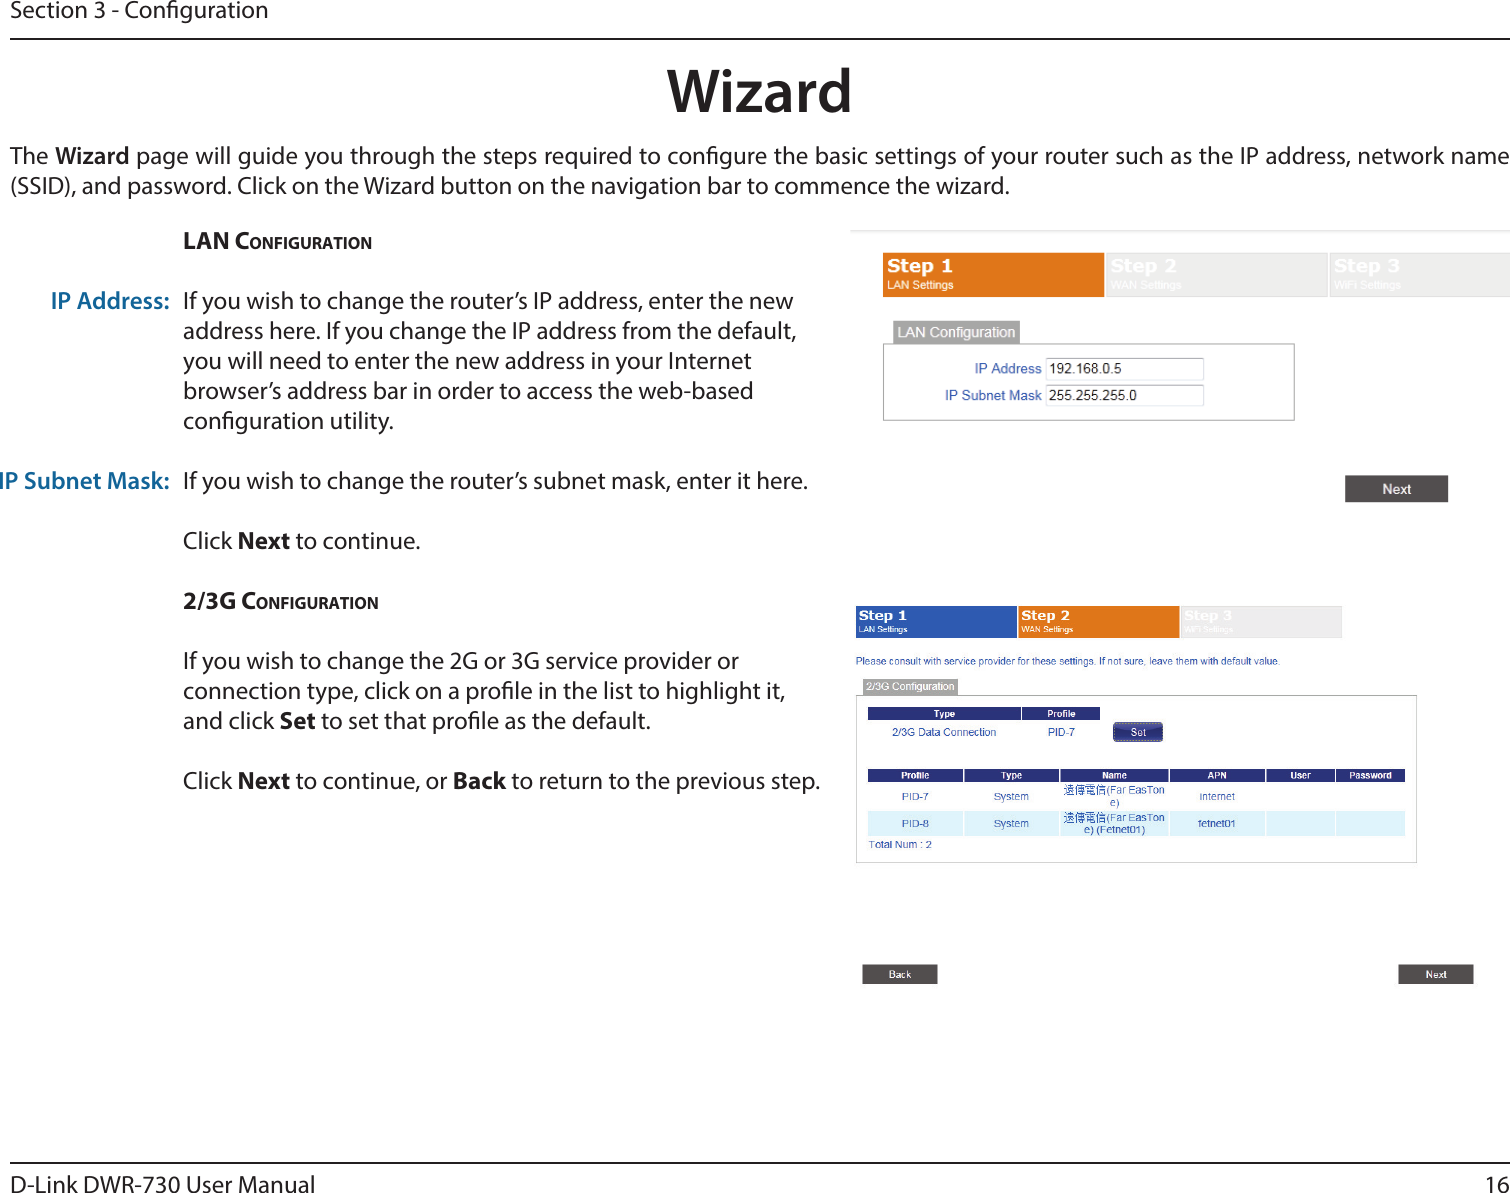 16D-Link DWR-730 User ManualSection 3 - CongurationWizardThe Wizard page will guide you through the steps required to congure the basic settings of your router such as the IP address, network name (SSID), and password. Click on the Wizard button on the navigation bar to commence the wizard.  LAN CoNfigurAtioNIf you wish to change the router’s IP address, enter the new address here. If you change the IP address from the default, you will need to enter the new address in your Internet browser’s address bar in order to access the web-based conguration utility.If you wish to change the router’s subnet mask, enter it here. Click Next to continue. 2/3g CoNfigurAtioNIf you wish to change the 2G or 3G service provider or connection type, click on a prole in the list to highlight it, and click Set to set that prole as the default. Click Next to continue, or Back to return to the previous step.IP Address:IP Subnet Mask: